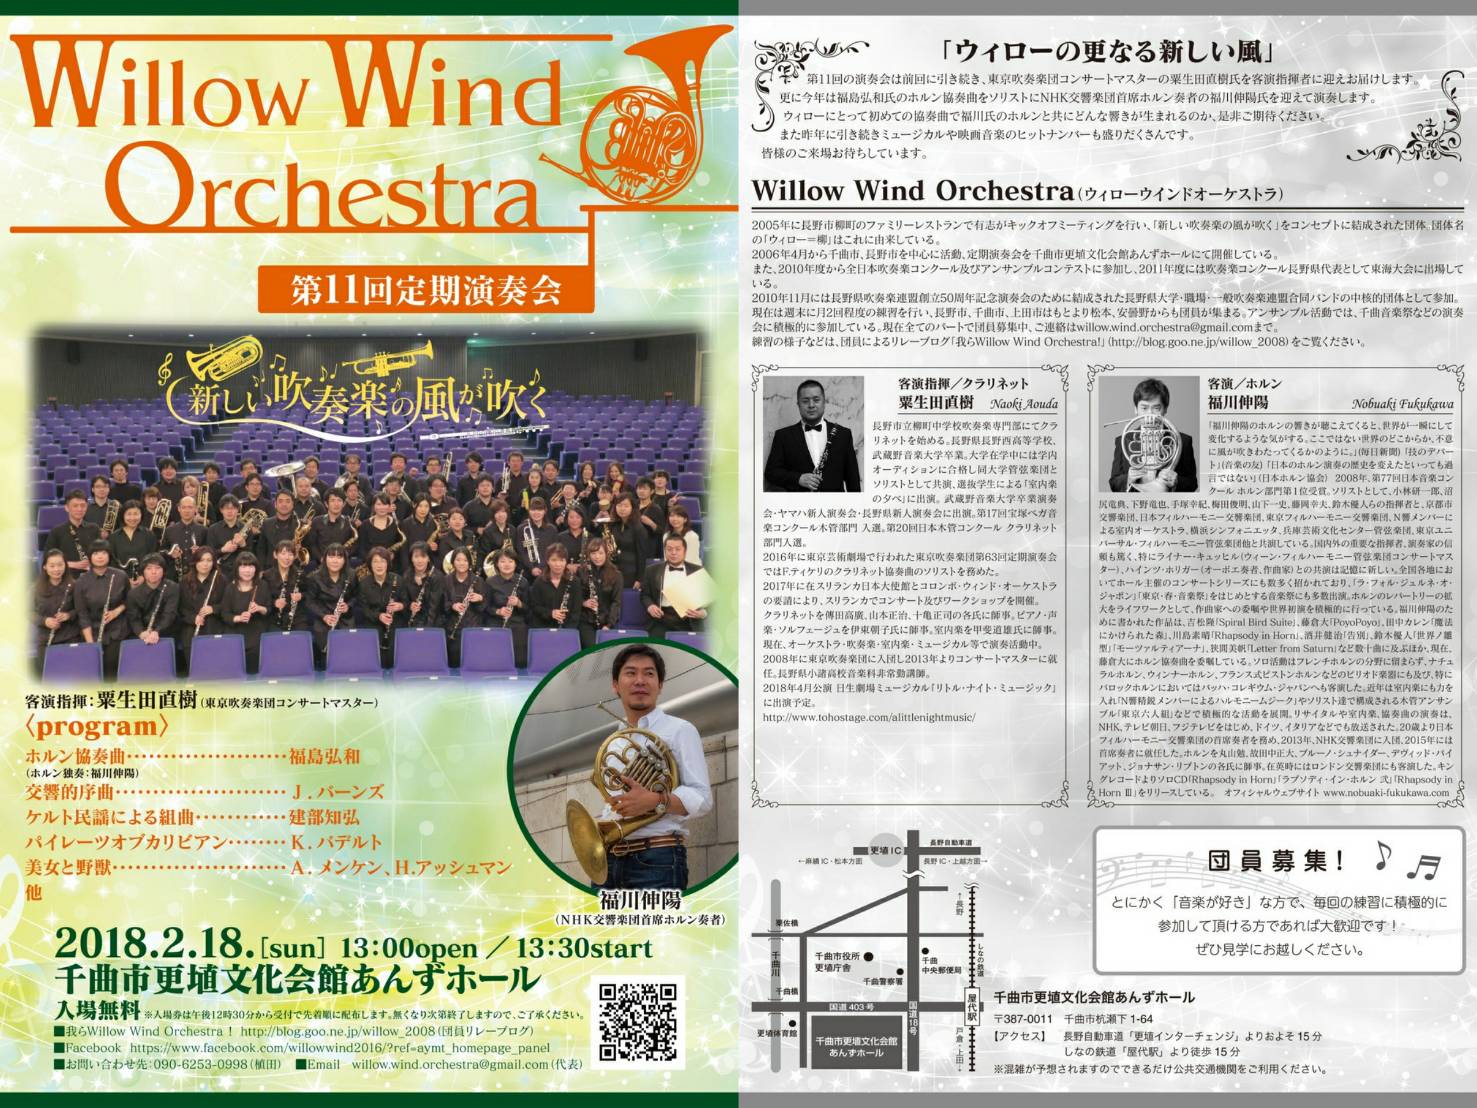 Willow Wind Orchestra